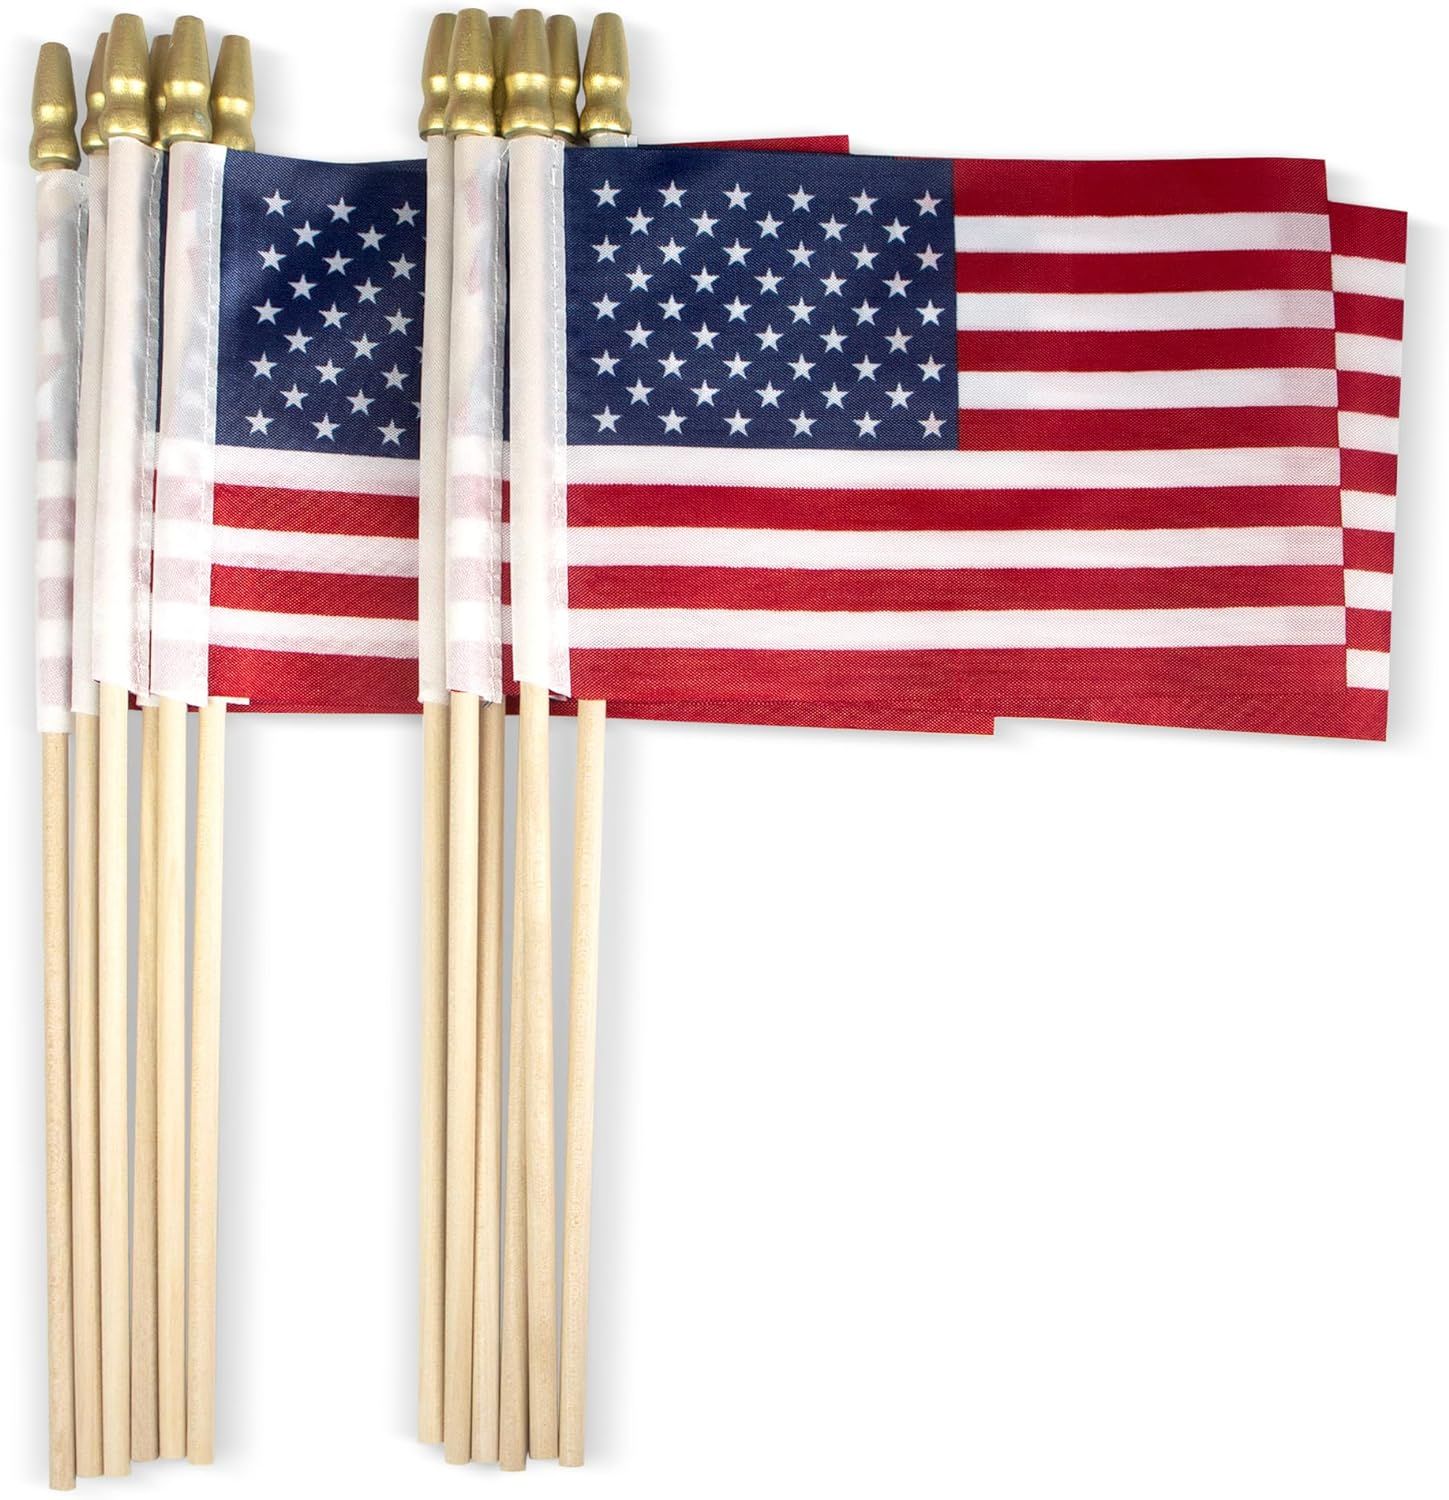 Anley LOT OF 12 - USA 4x6 in Wooden Stick Flag - July 4th Decoration, Veteran Party, Grave Marker... | Amazon (US)